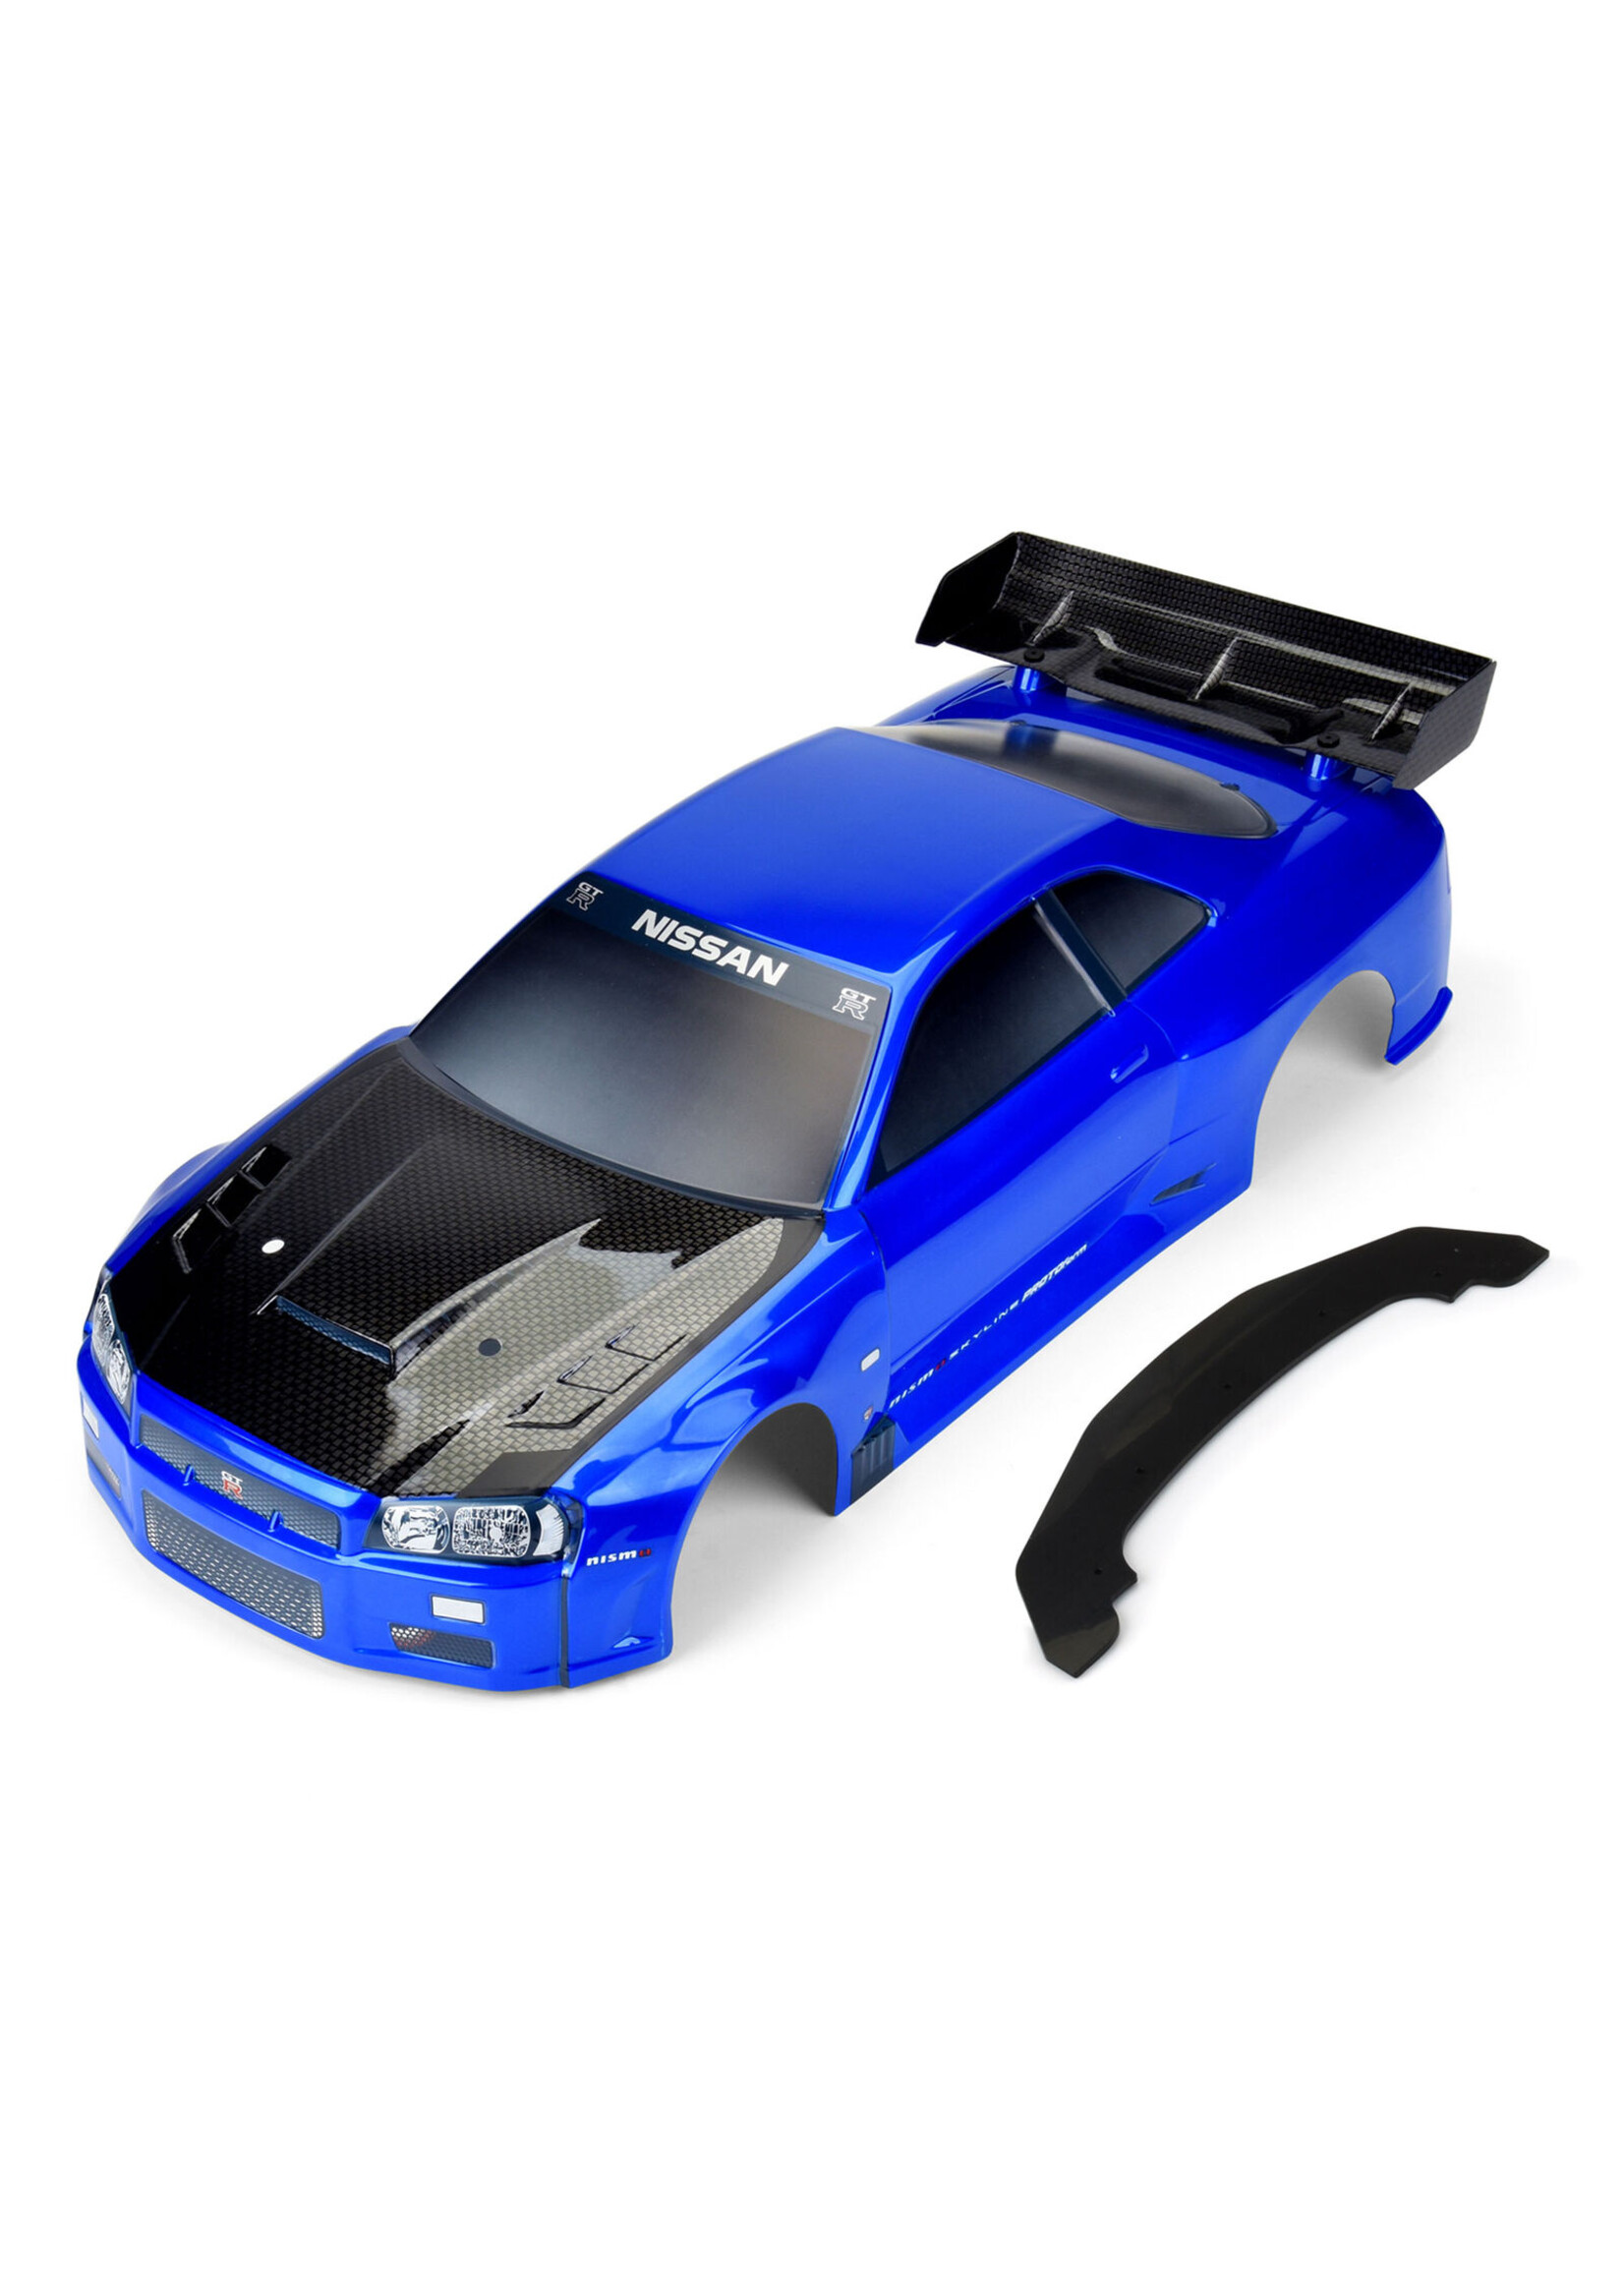 Protoform 1/7 Infraction 6S 2002 Nissan Skyline GT-R R34 Painted Body - Blue